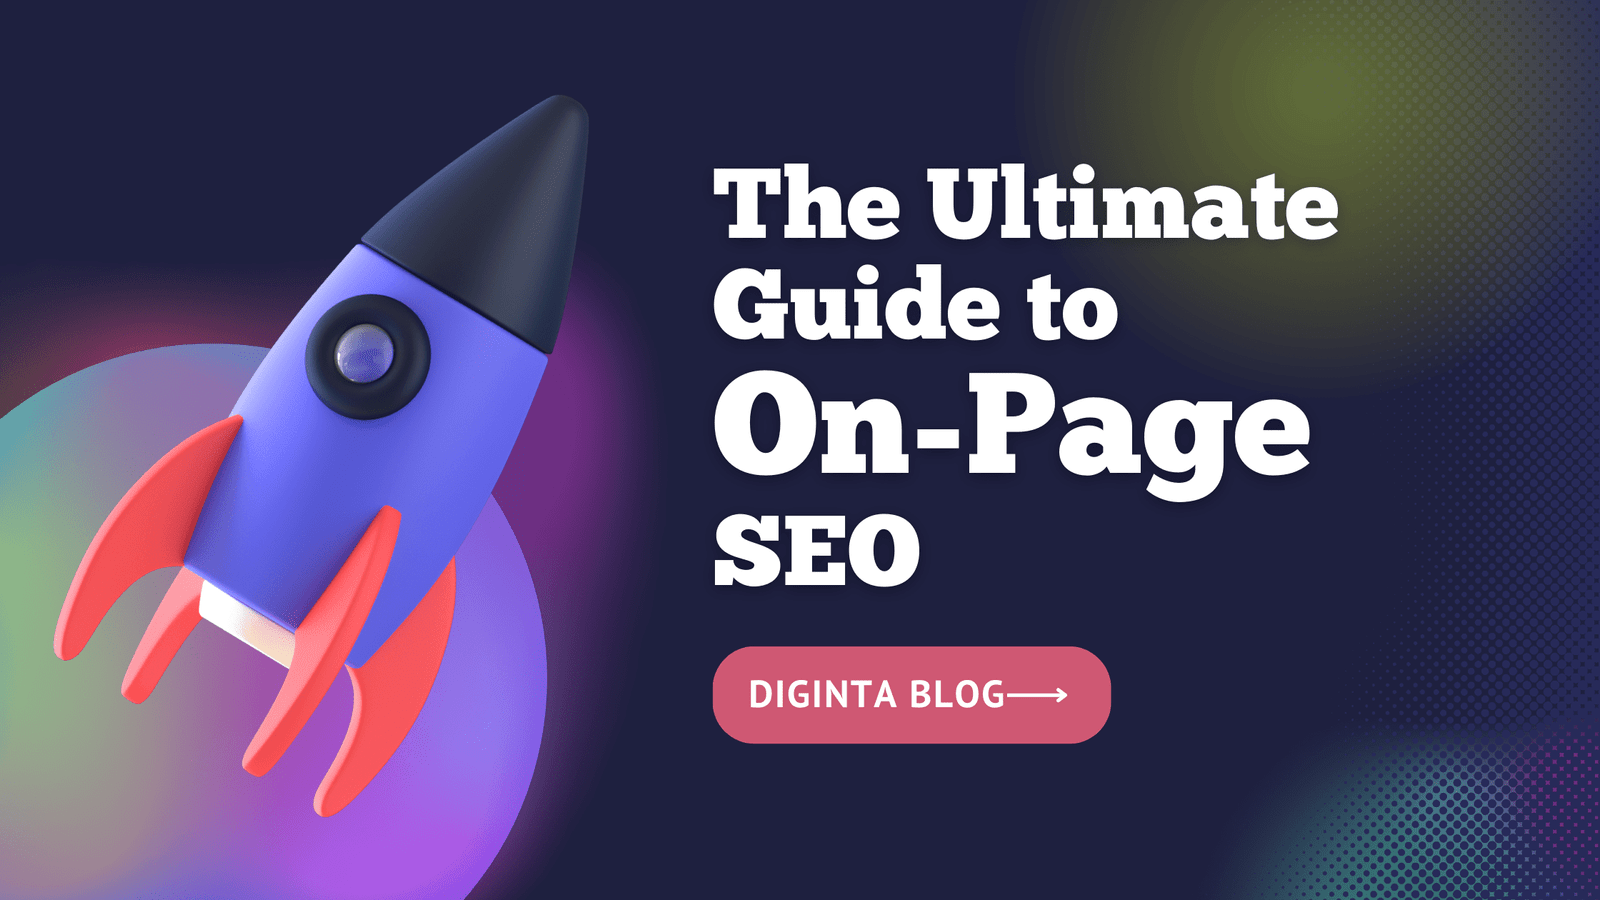 Cover image for the ultimate guide to on-page SEO for New York businesses - Diginta Marketing